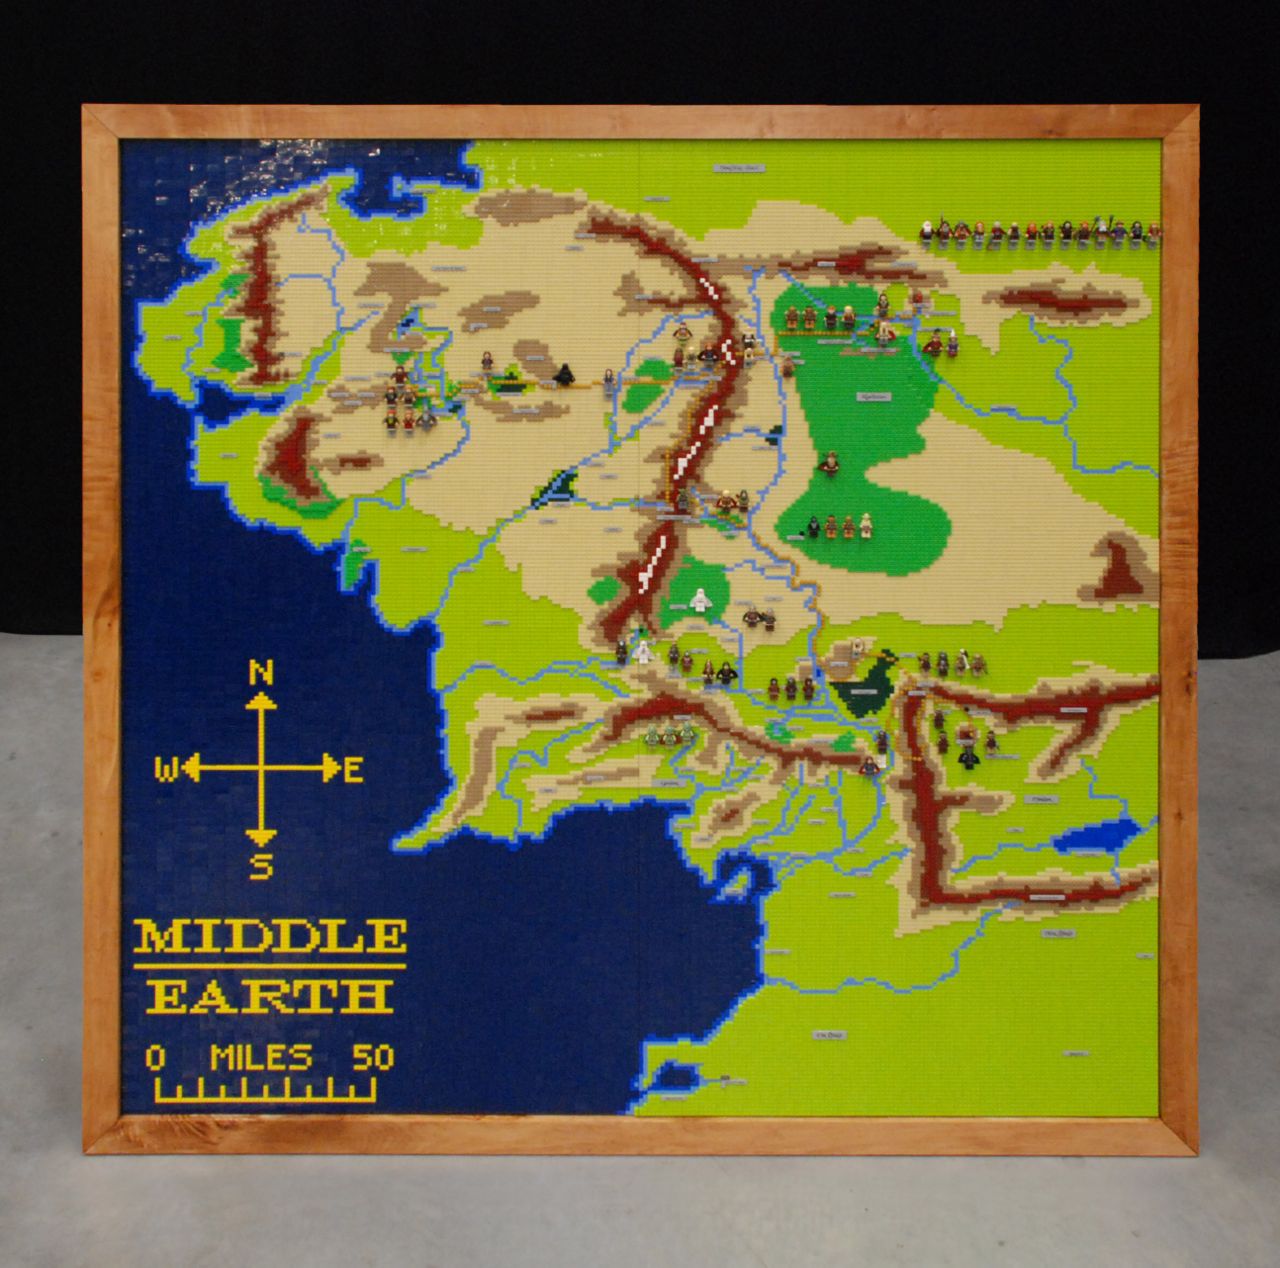 lotr-lego-map-overview-large.jpg